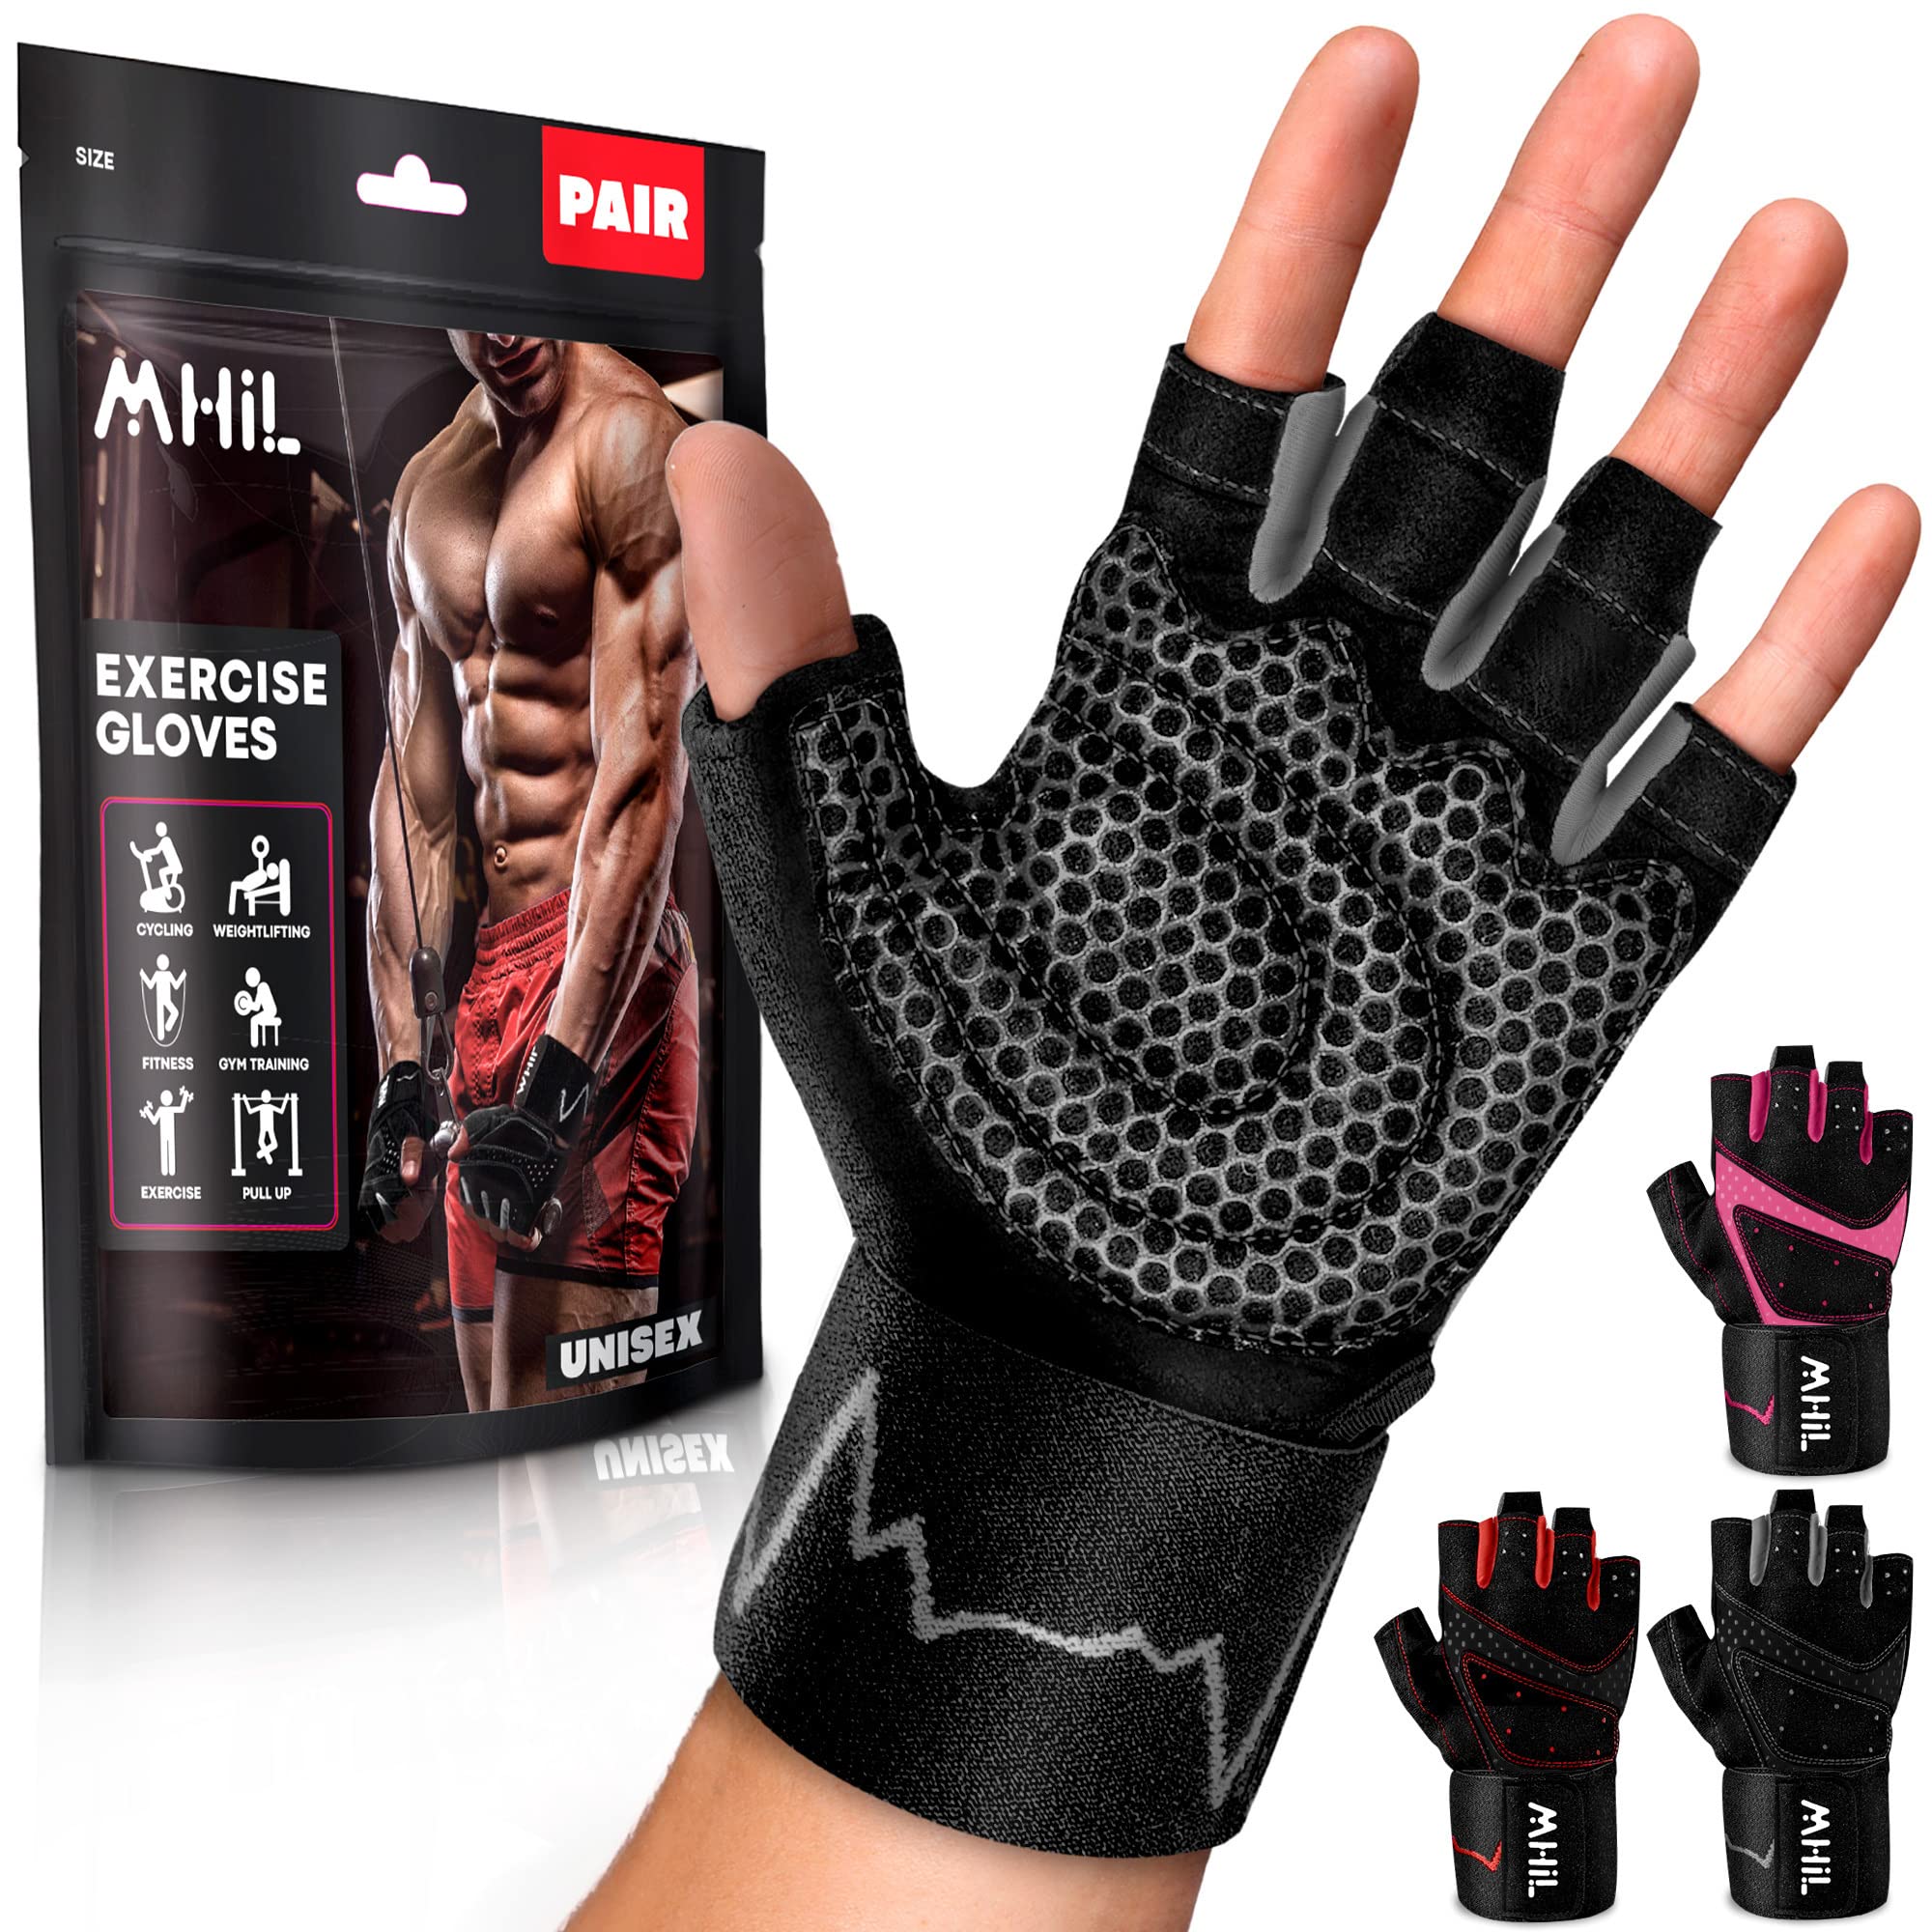 MhIL Workout Gloves for Mens & Womens - Weight Lifting Gloves, Gym Gloves  for Men - Exercise Gloves, Training Gloves with Wrist Wraps Support for  Weightlifting, Work Out, Pull up- Full Palm